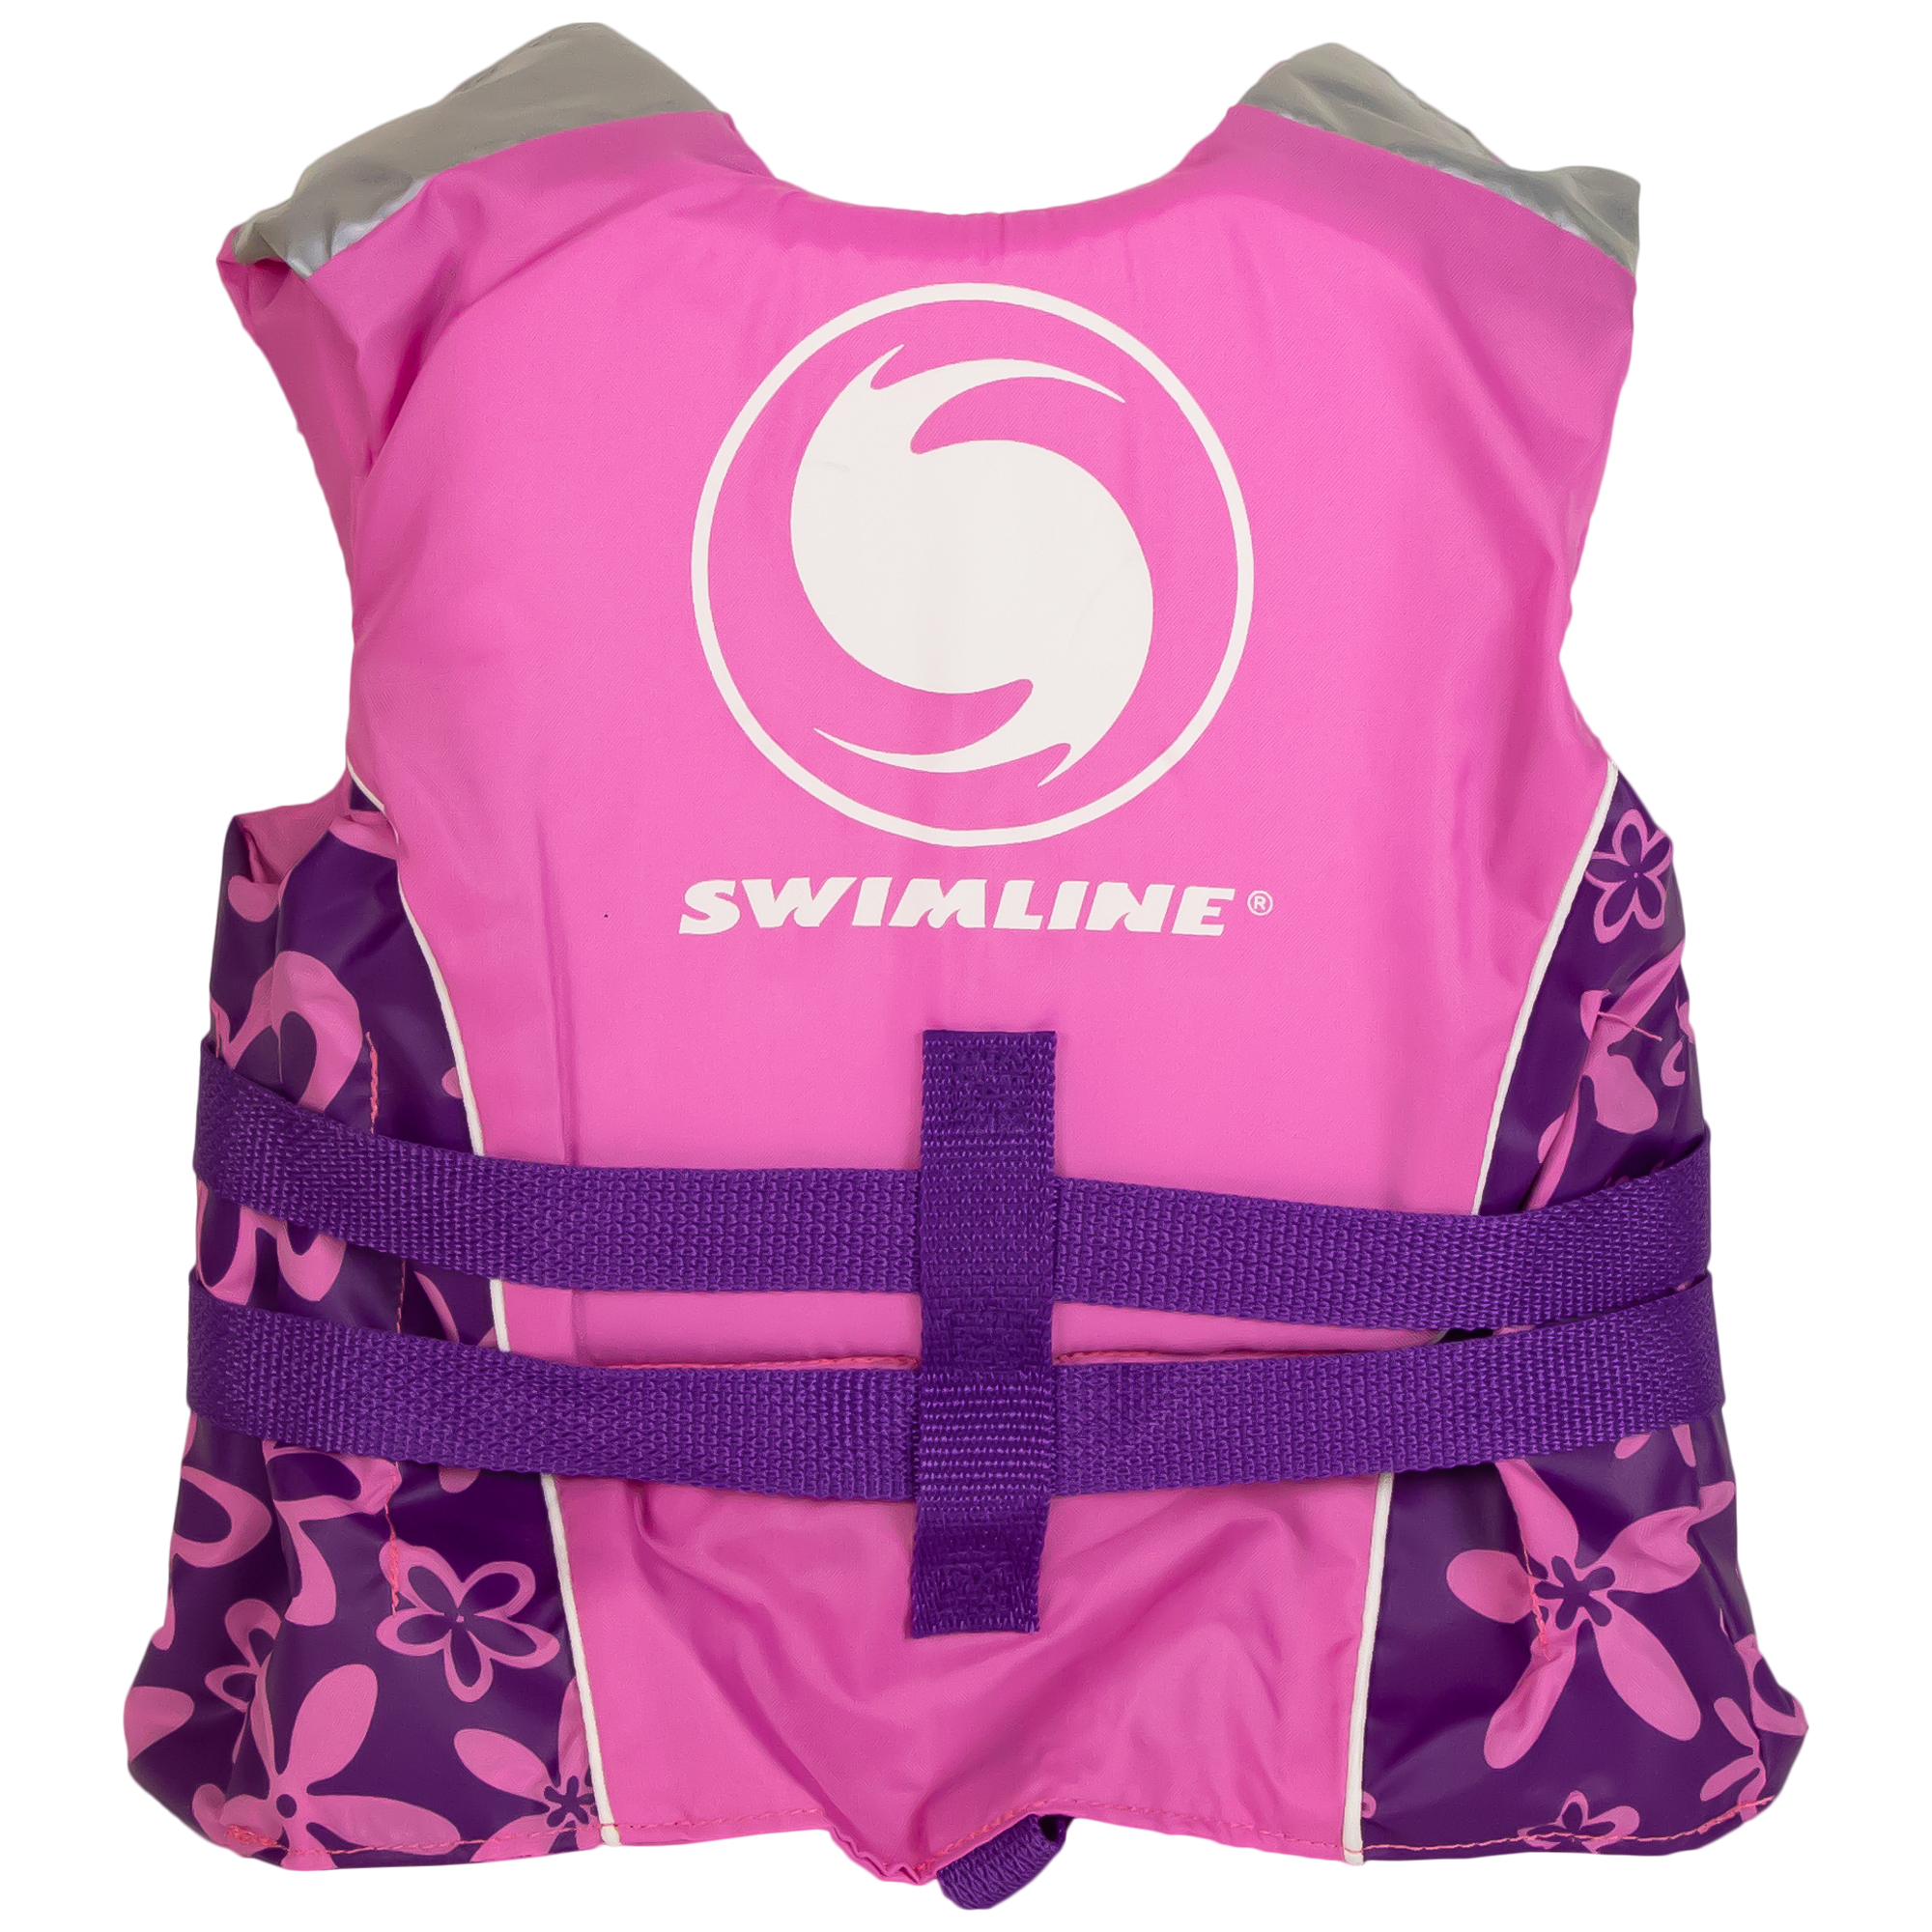 Swim Central Pink and Purple Floral Child Life Jacket Vest with Handle - Up to 50lbs